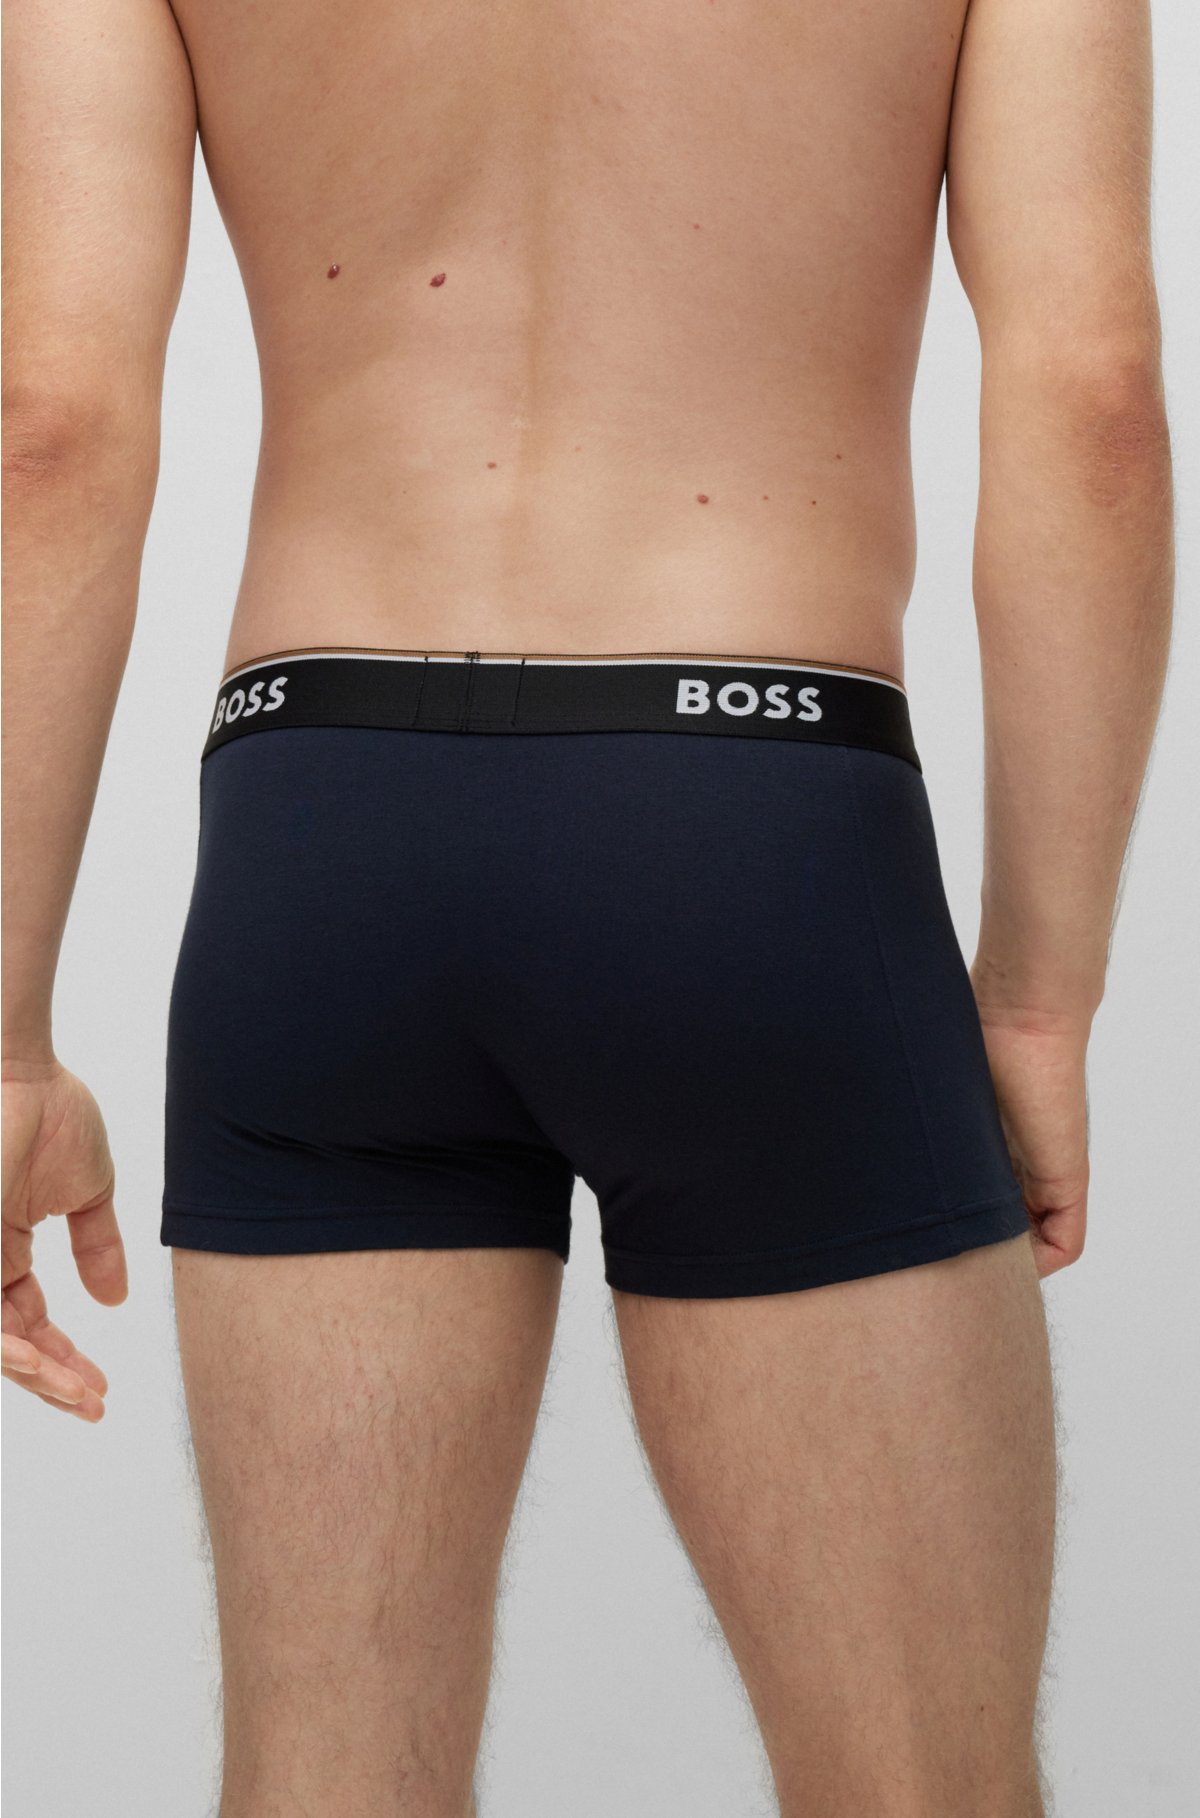 BOSS - Triple-pack of stretch-cotton logo trunks waistbands with